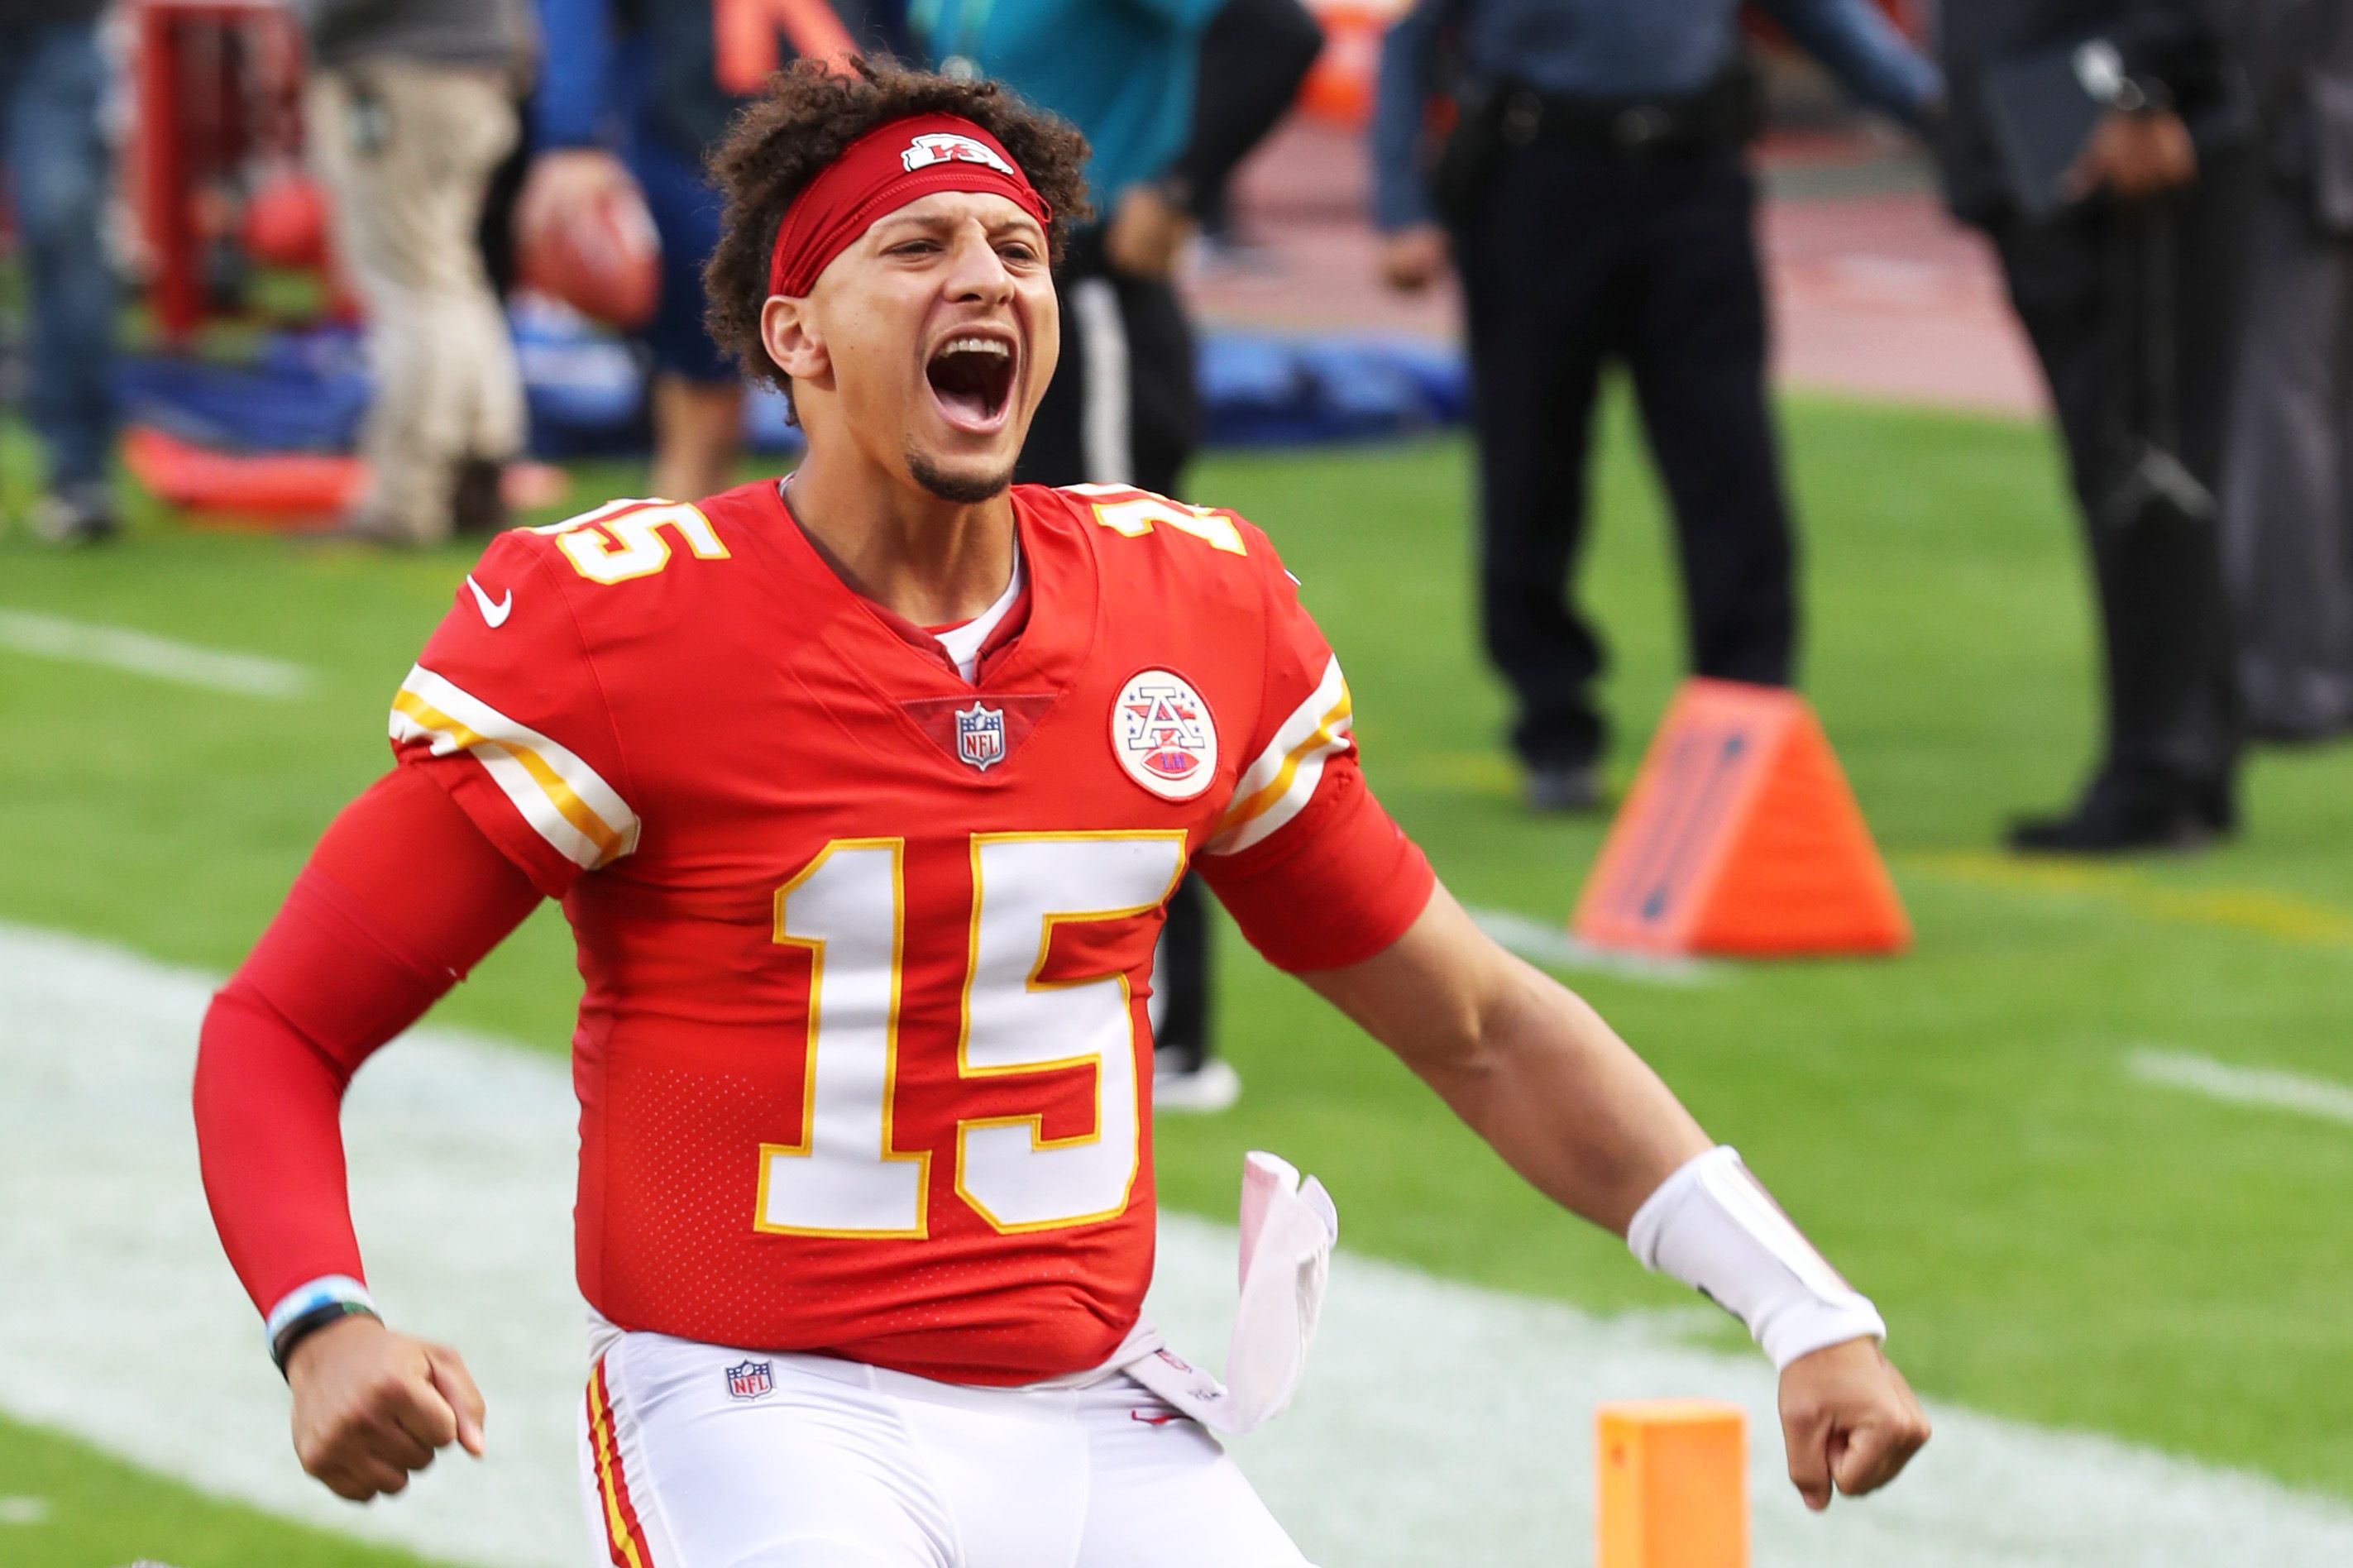 Patrick Mahomes celebrates in an NFL game.